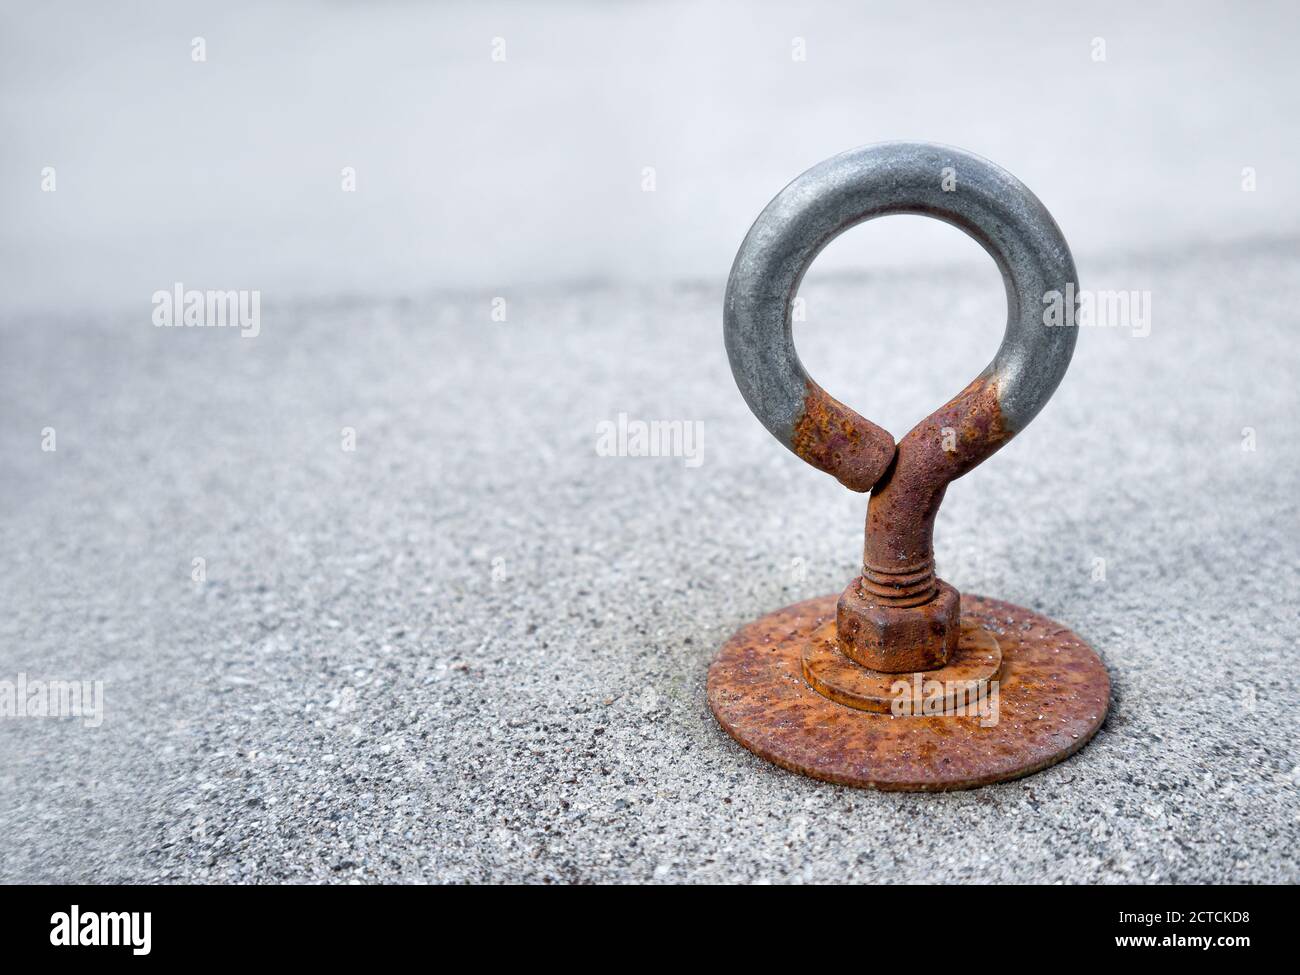 Rusty eye loop or loop screw. Close up. Bolted to an outdoor cement tile covering the patio drain. Eye loops are used to attach ropes or cables. Stock Photo